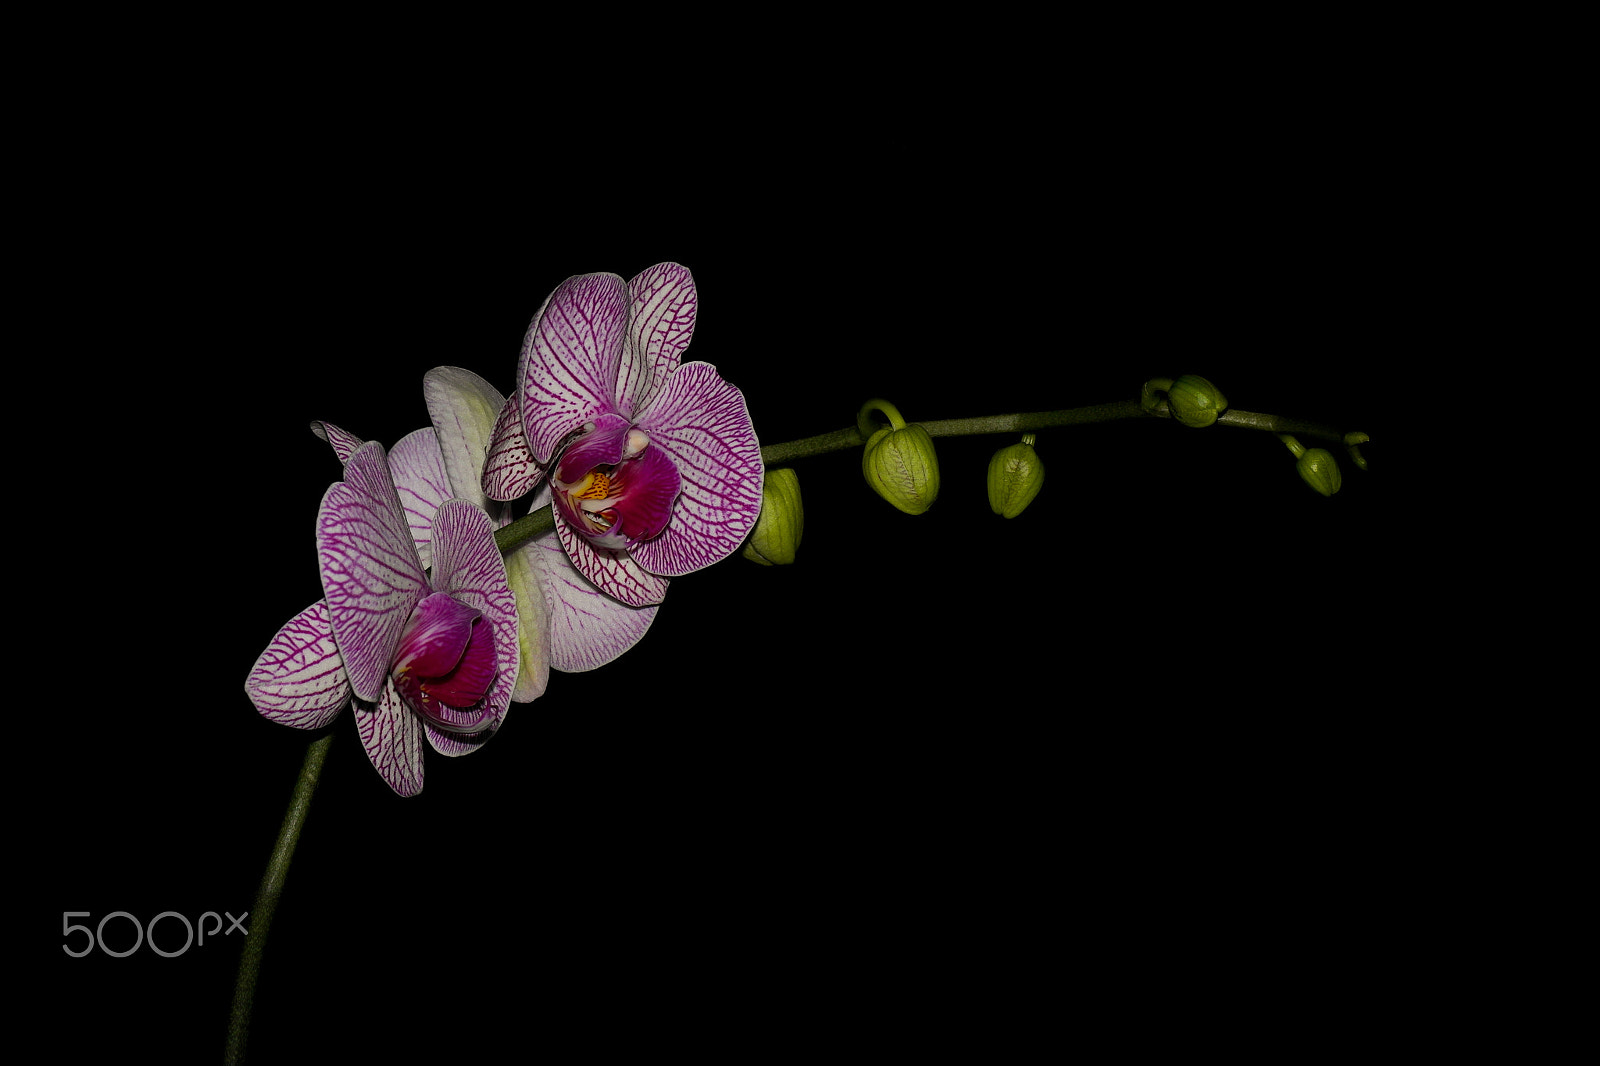 Samsung NX20 sample photo. Orkide / orchid photography